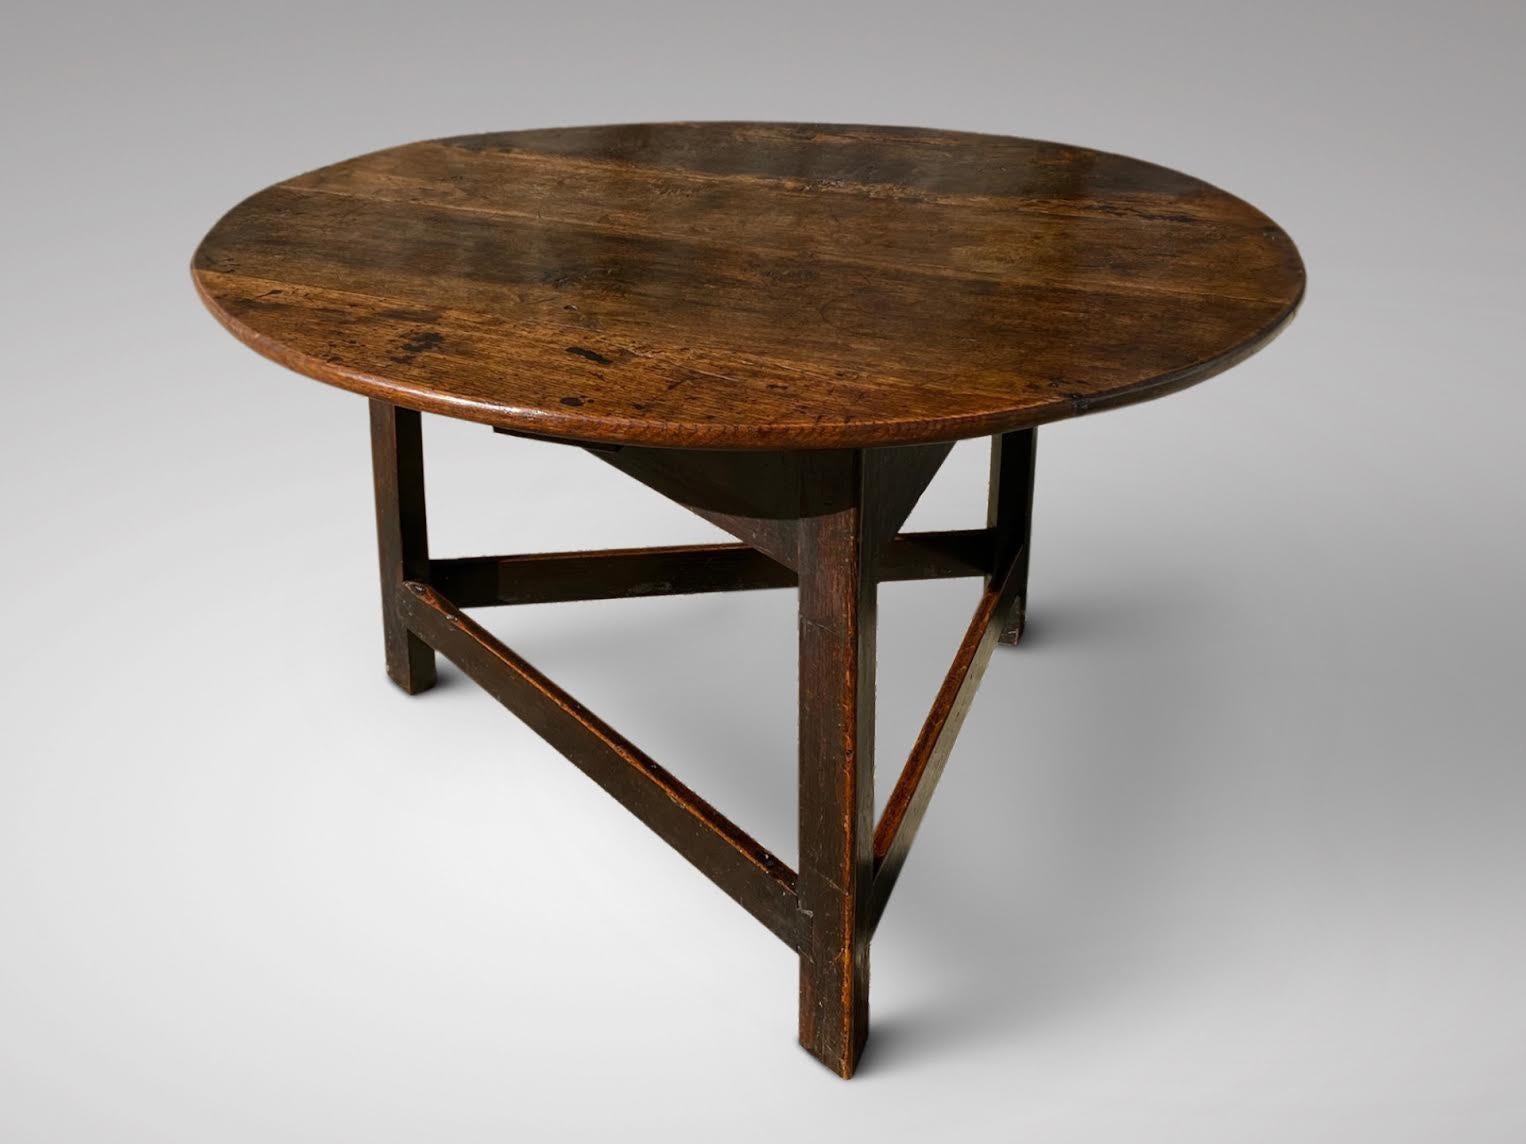 Hand-Crafted Stunning 18th Century Georgian Antique Solid Oak Cricket Table